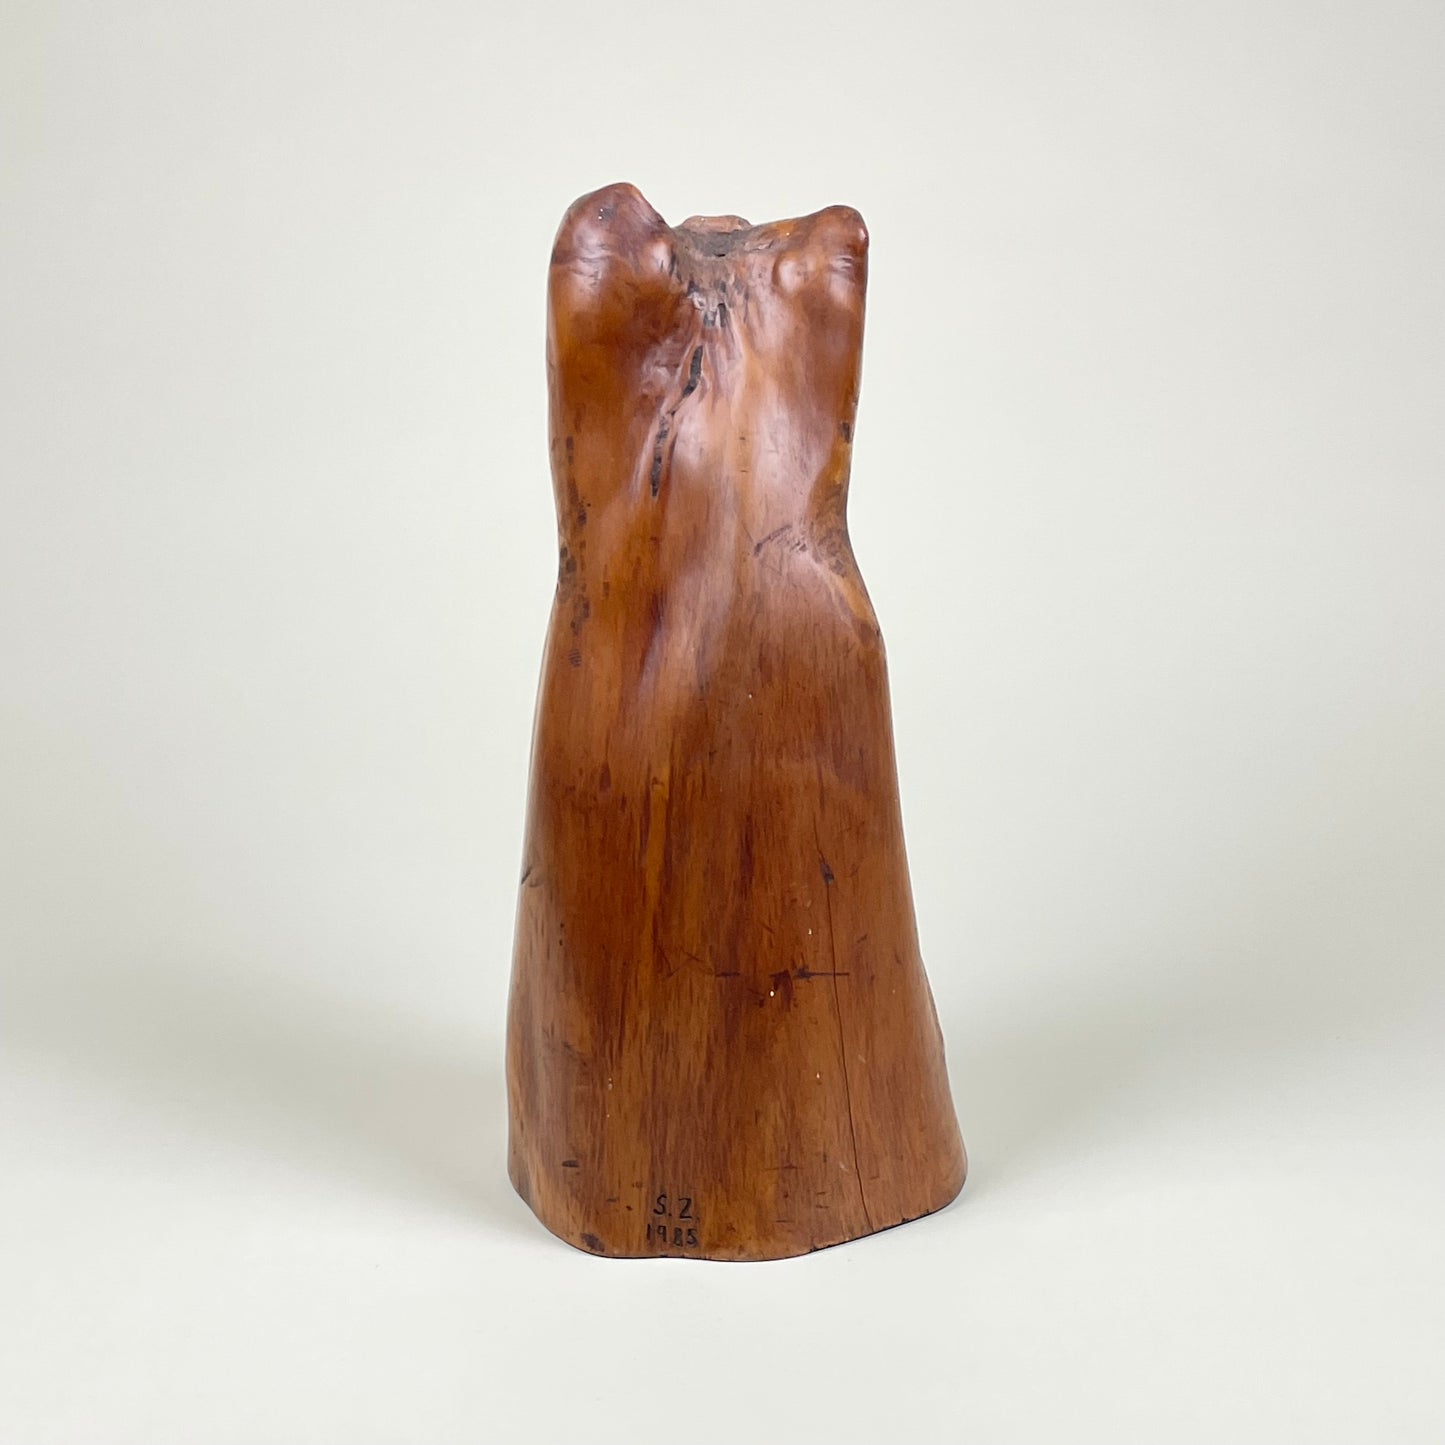 Wooden abstract female sculpture